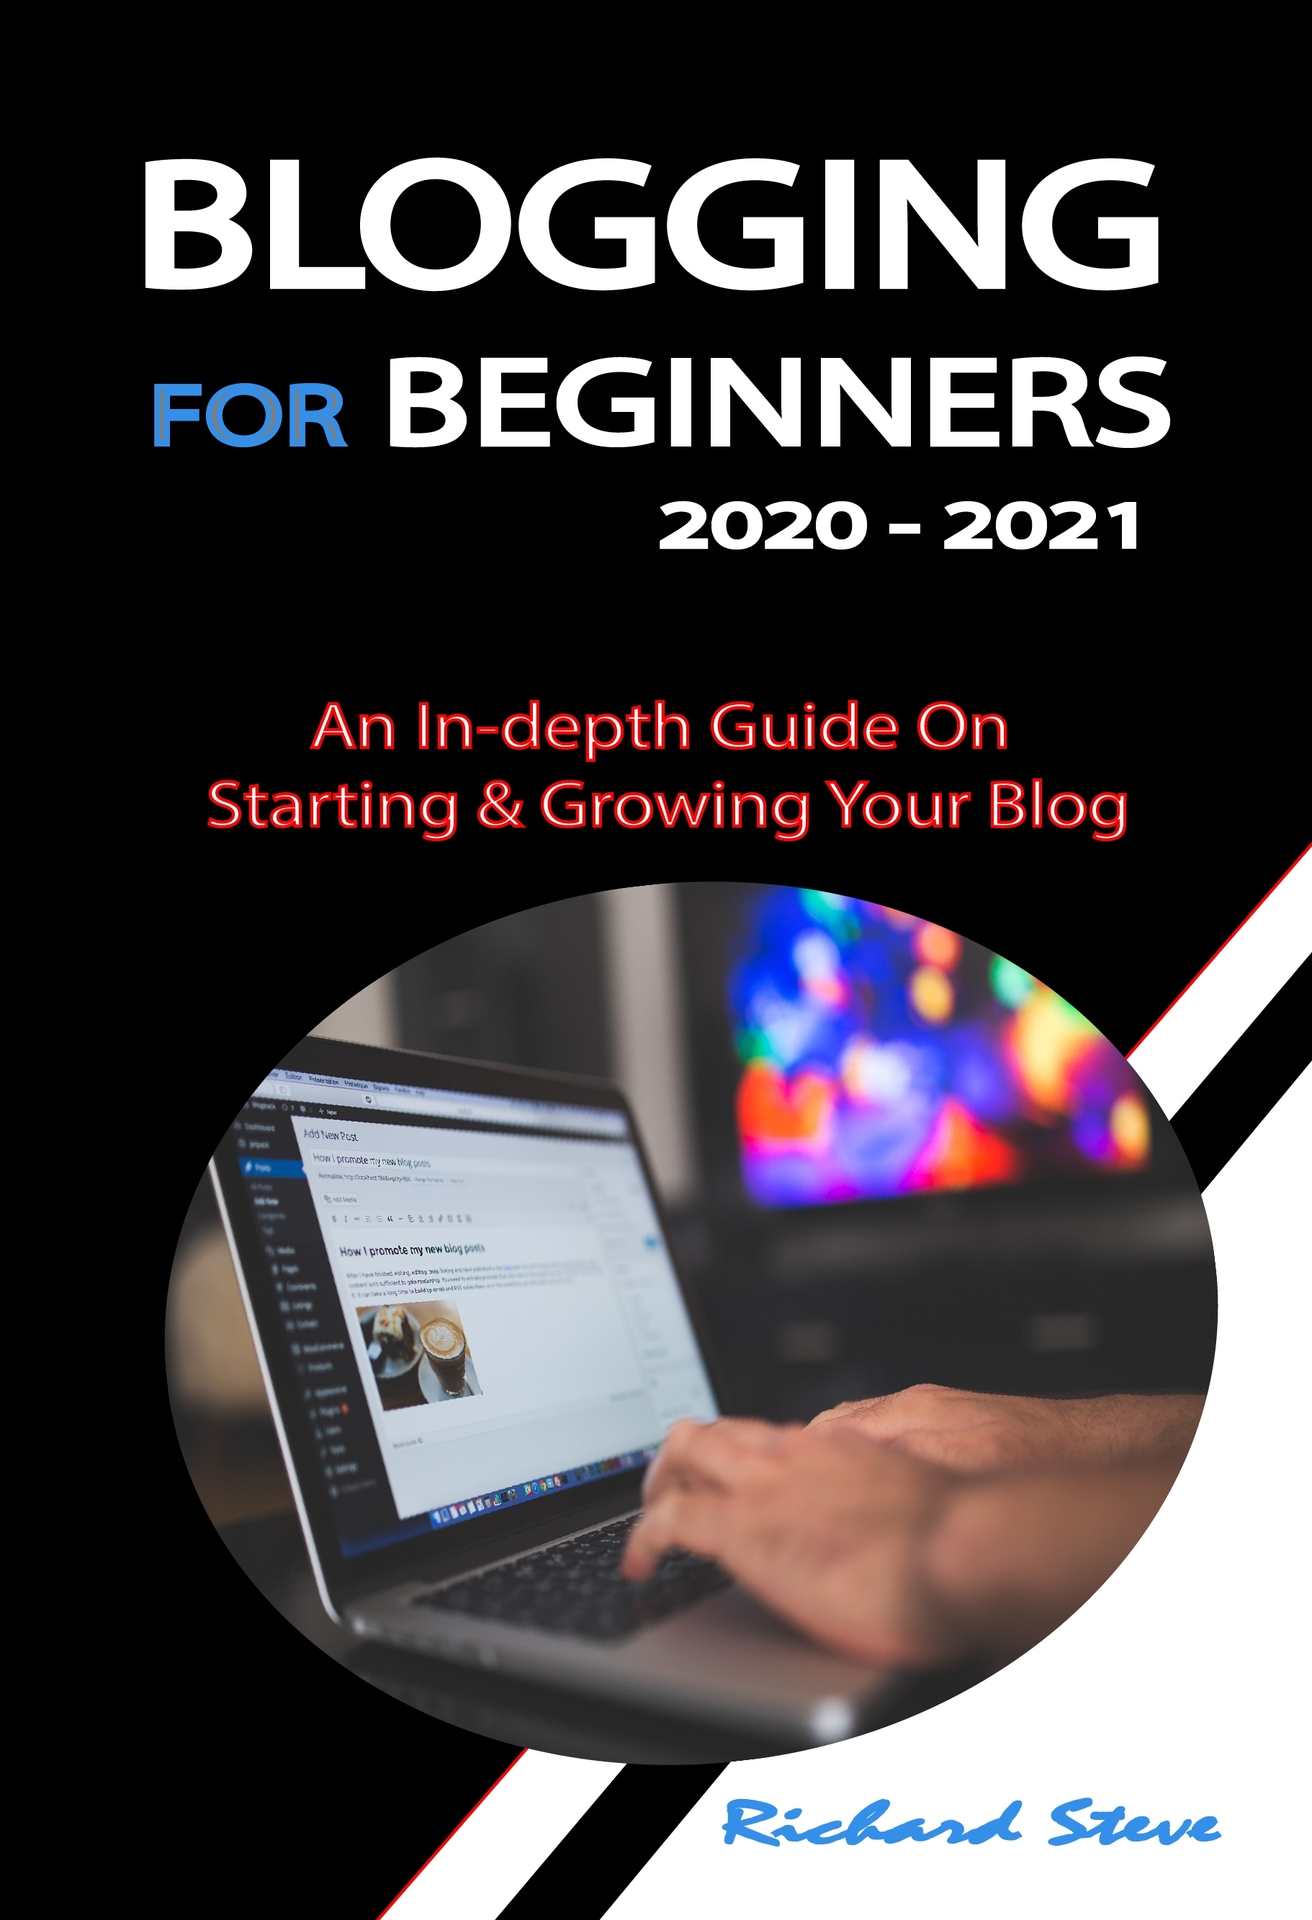 BLOGGING FOR BEGINNERS 2020 - 2021: An In-depth Guide On Starting & Growing Your Blog